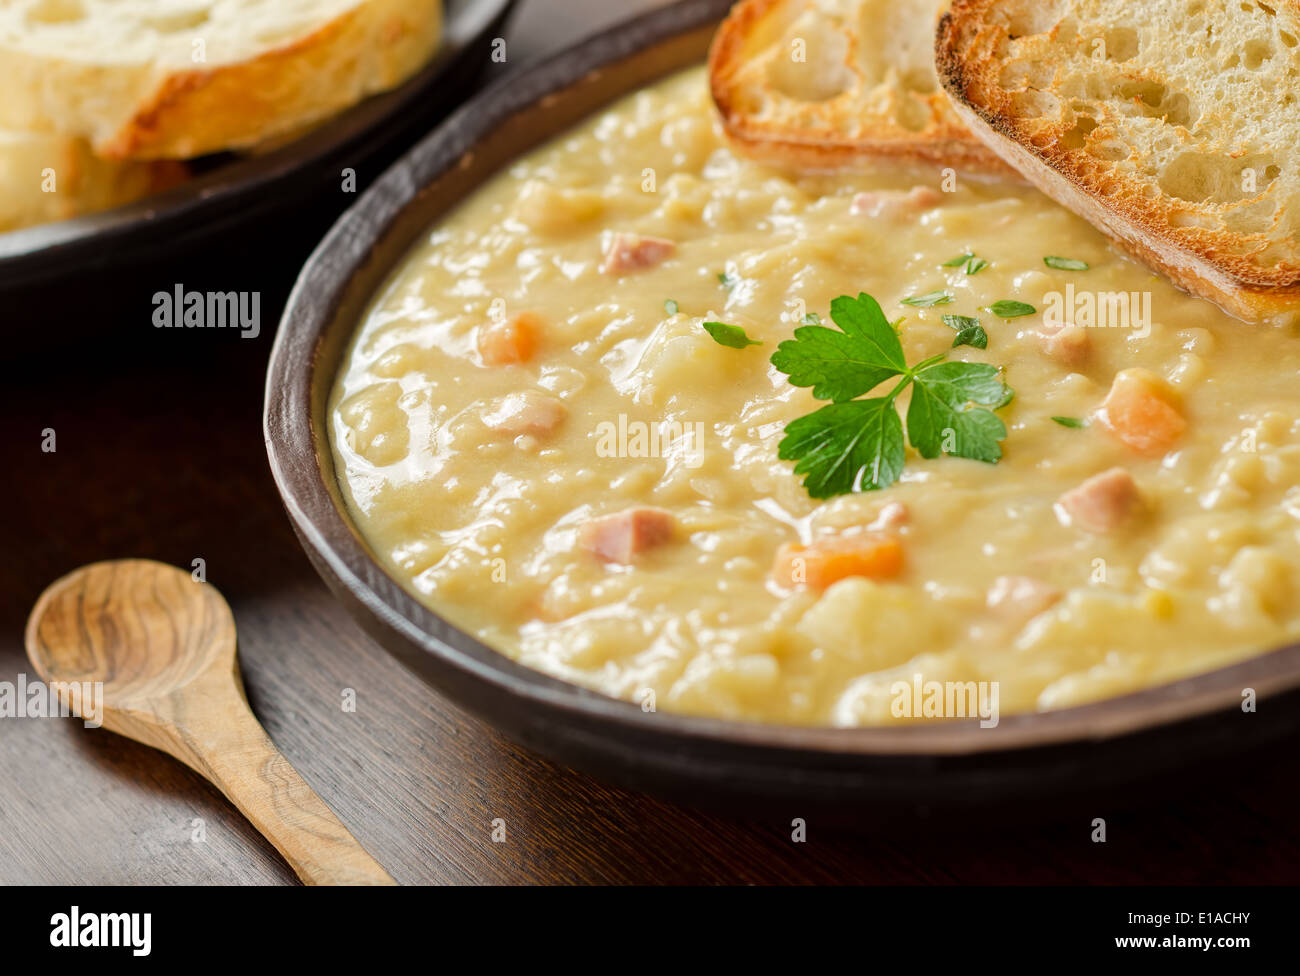 A rustic bowl of hearty spit pea soup with smoked ham, carrots, potato, and french bread. Stock Photo